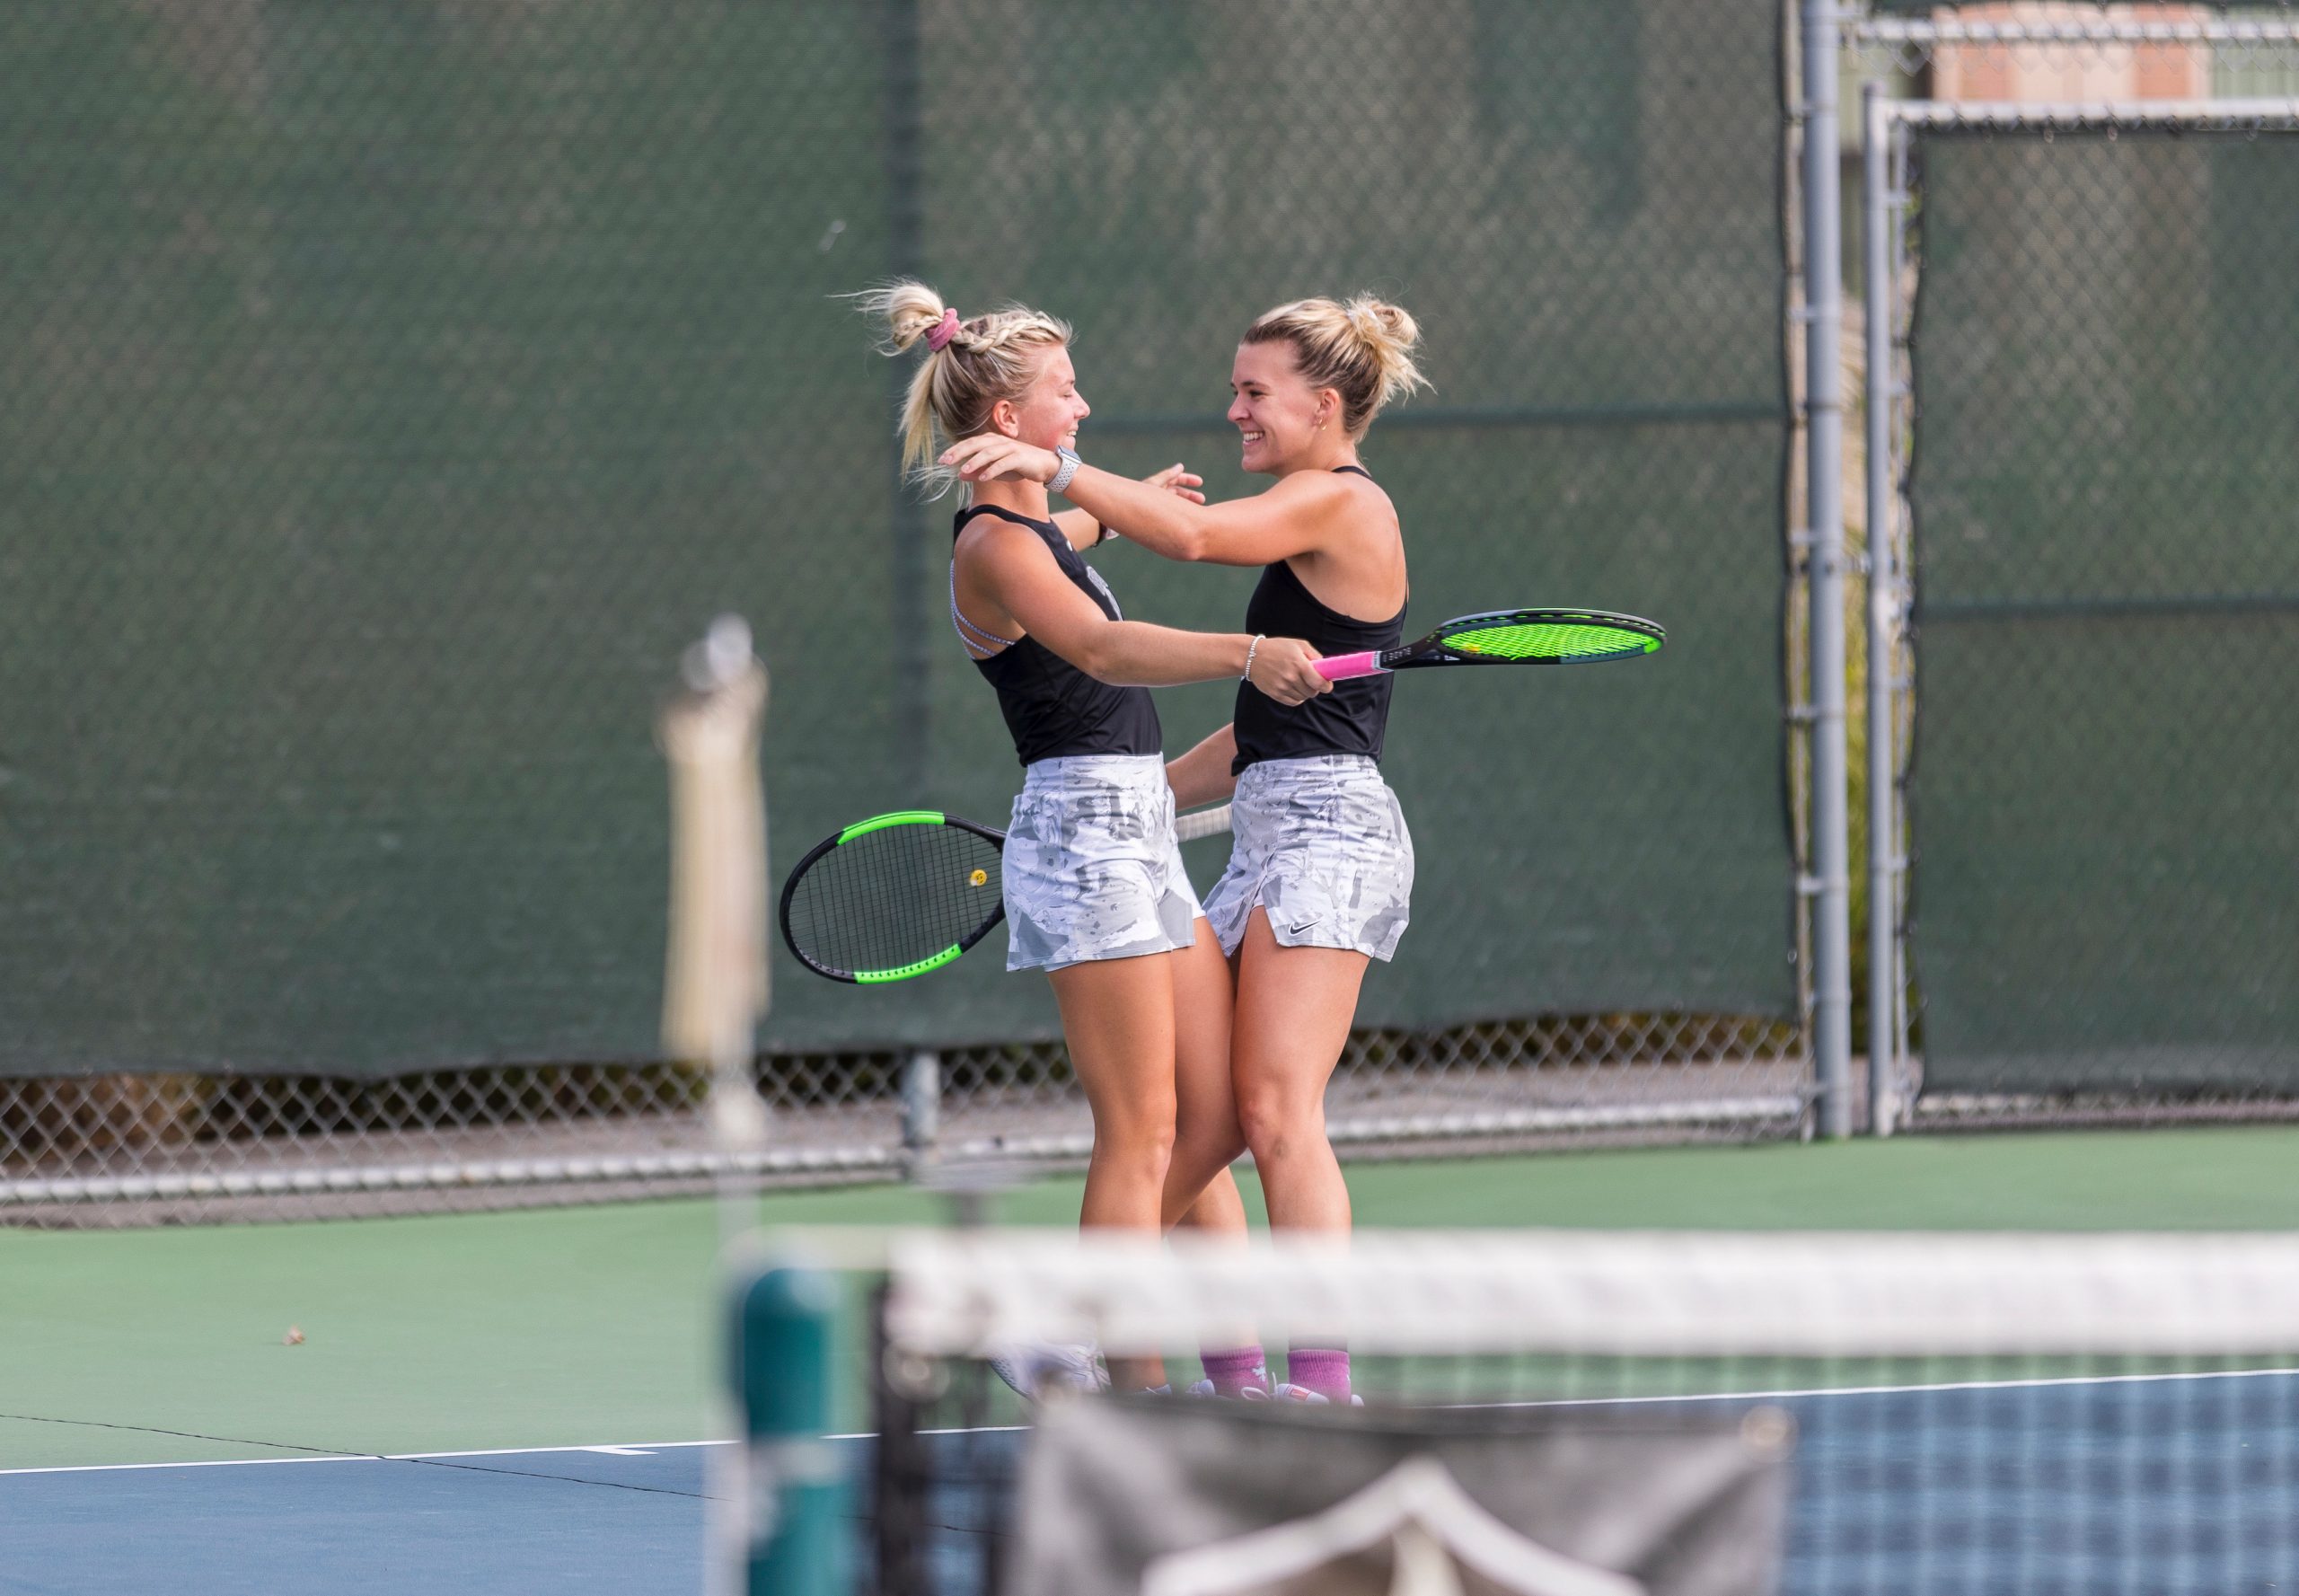 Olivia Czerwonka '23, '26 DNP, embracing her sister and doubles partner, Claire Czerwonka '21, '24 DNP, on Valpo's tennis court after a match.